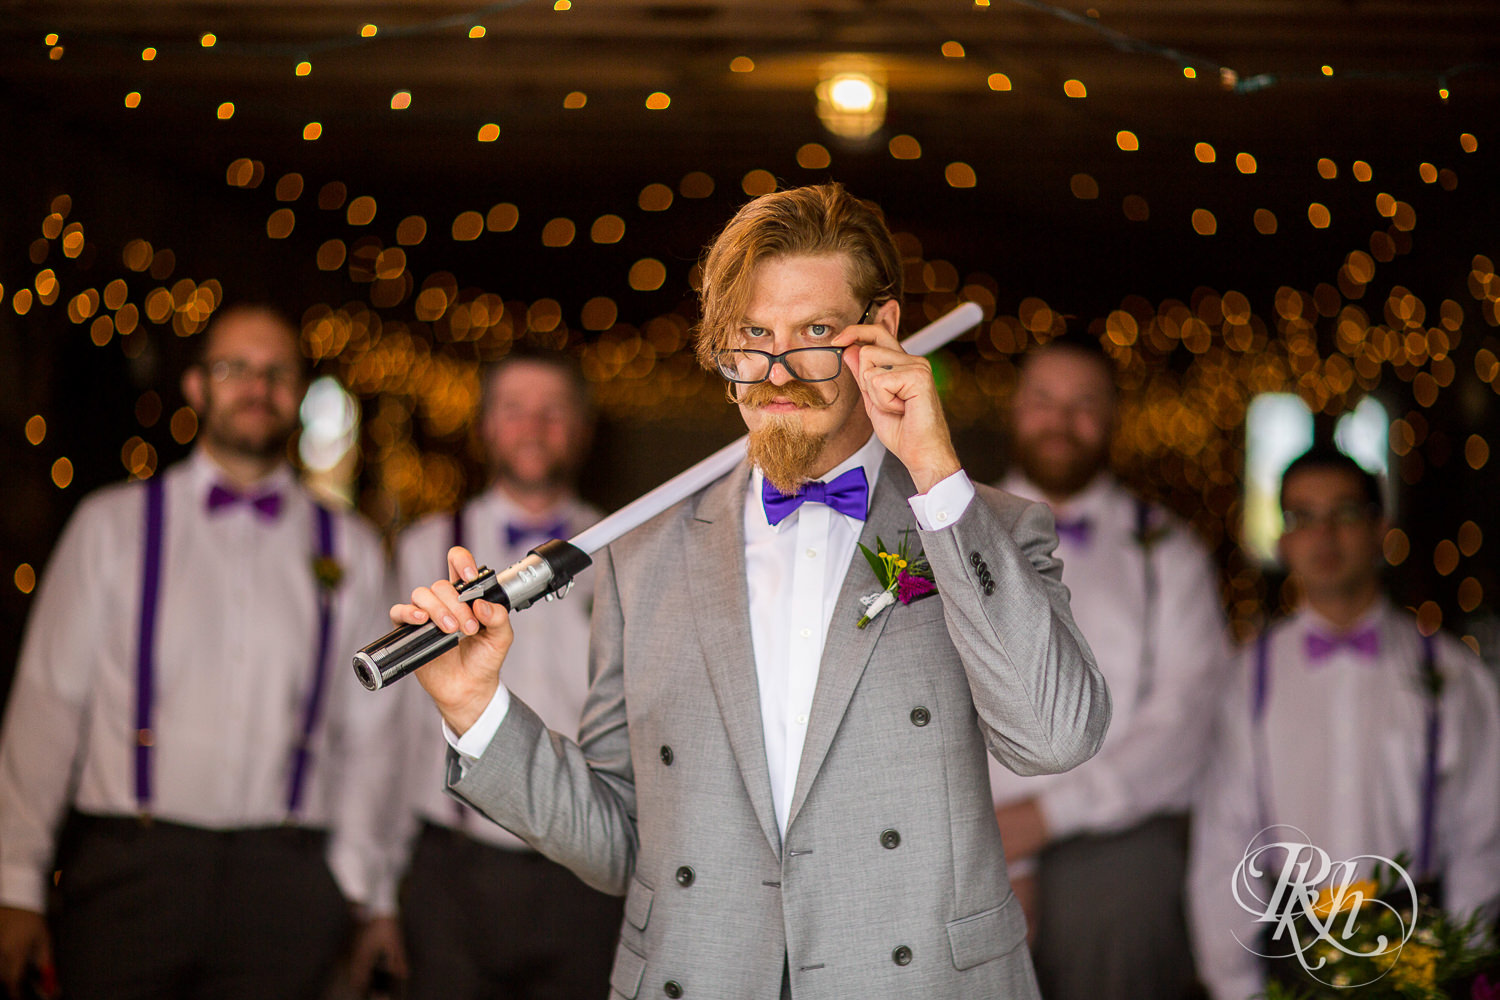 Groom smiles with Star Wars light sabers before wedding at Coops Event Barn in Dodge Center, Minnesota.